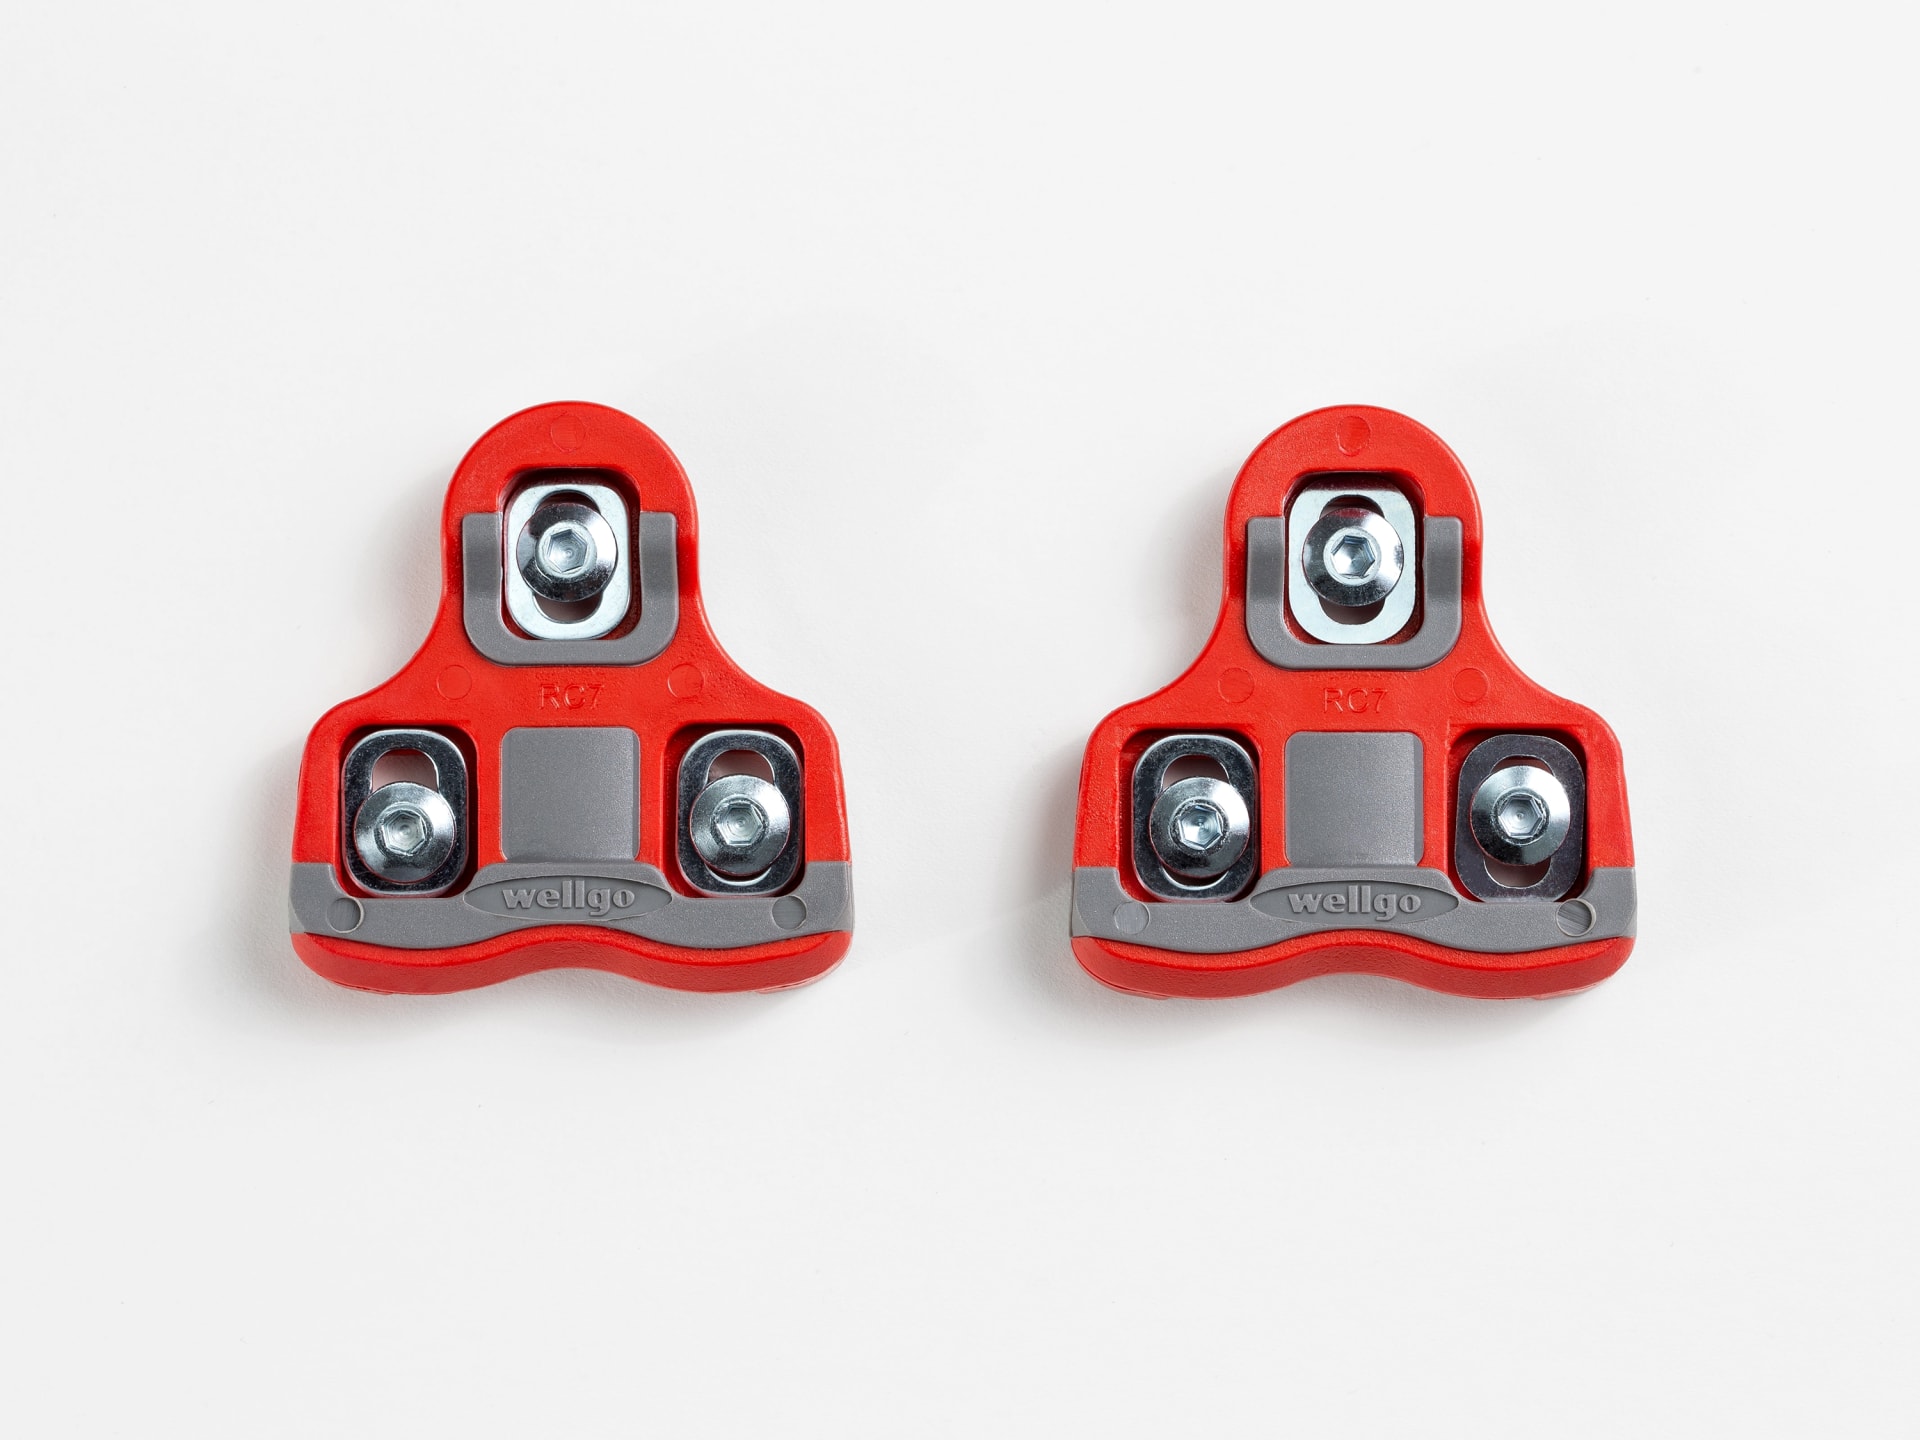 Bontrager Road Clipless Degree Pedal Cleat Set